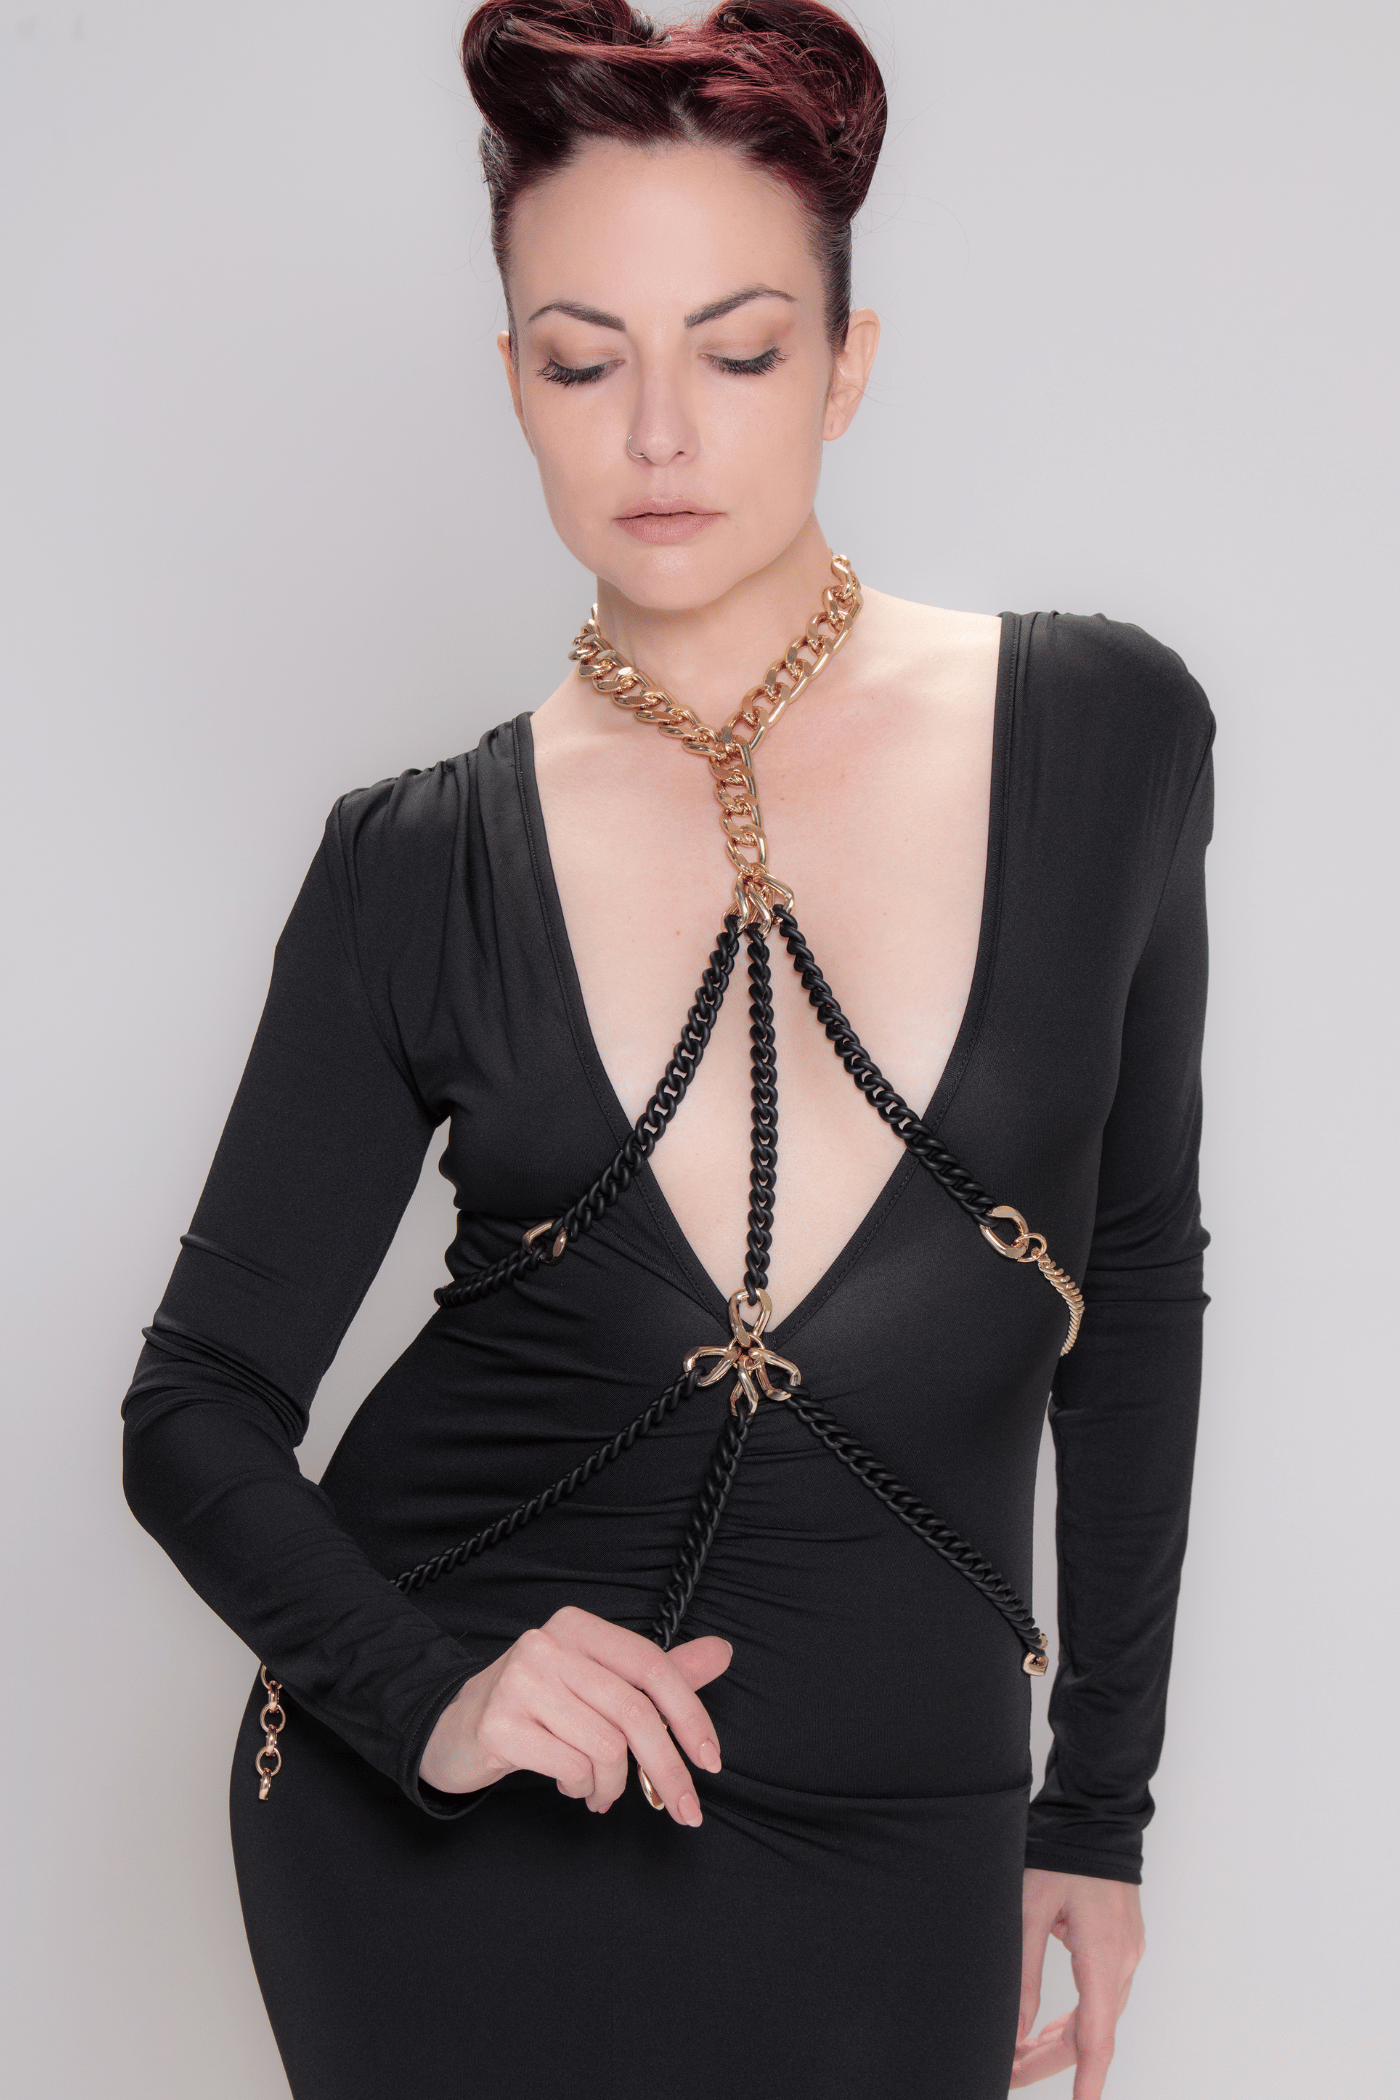 elegant gothic body chain necklace black with gold details